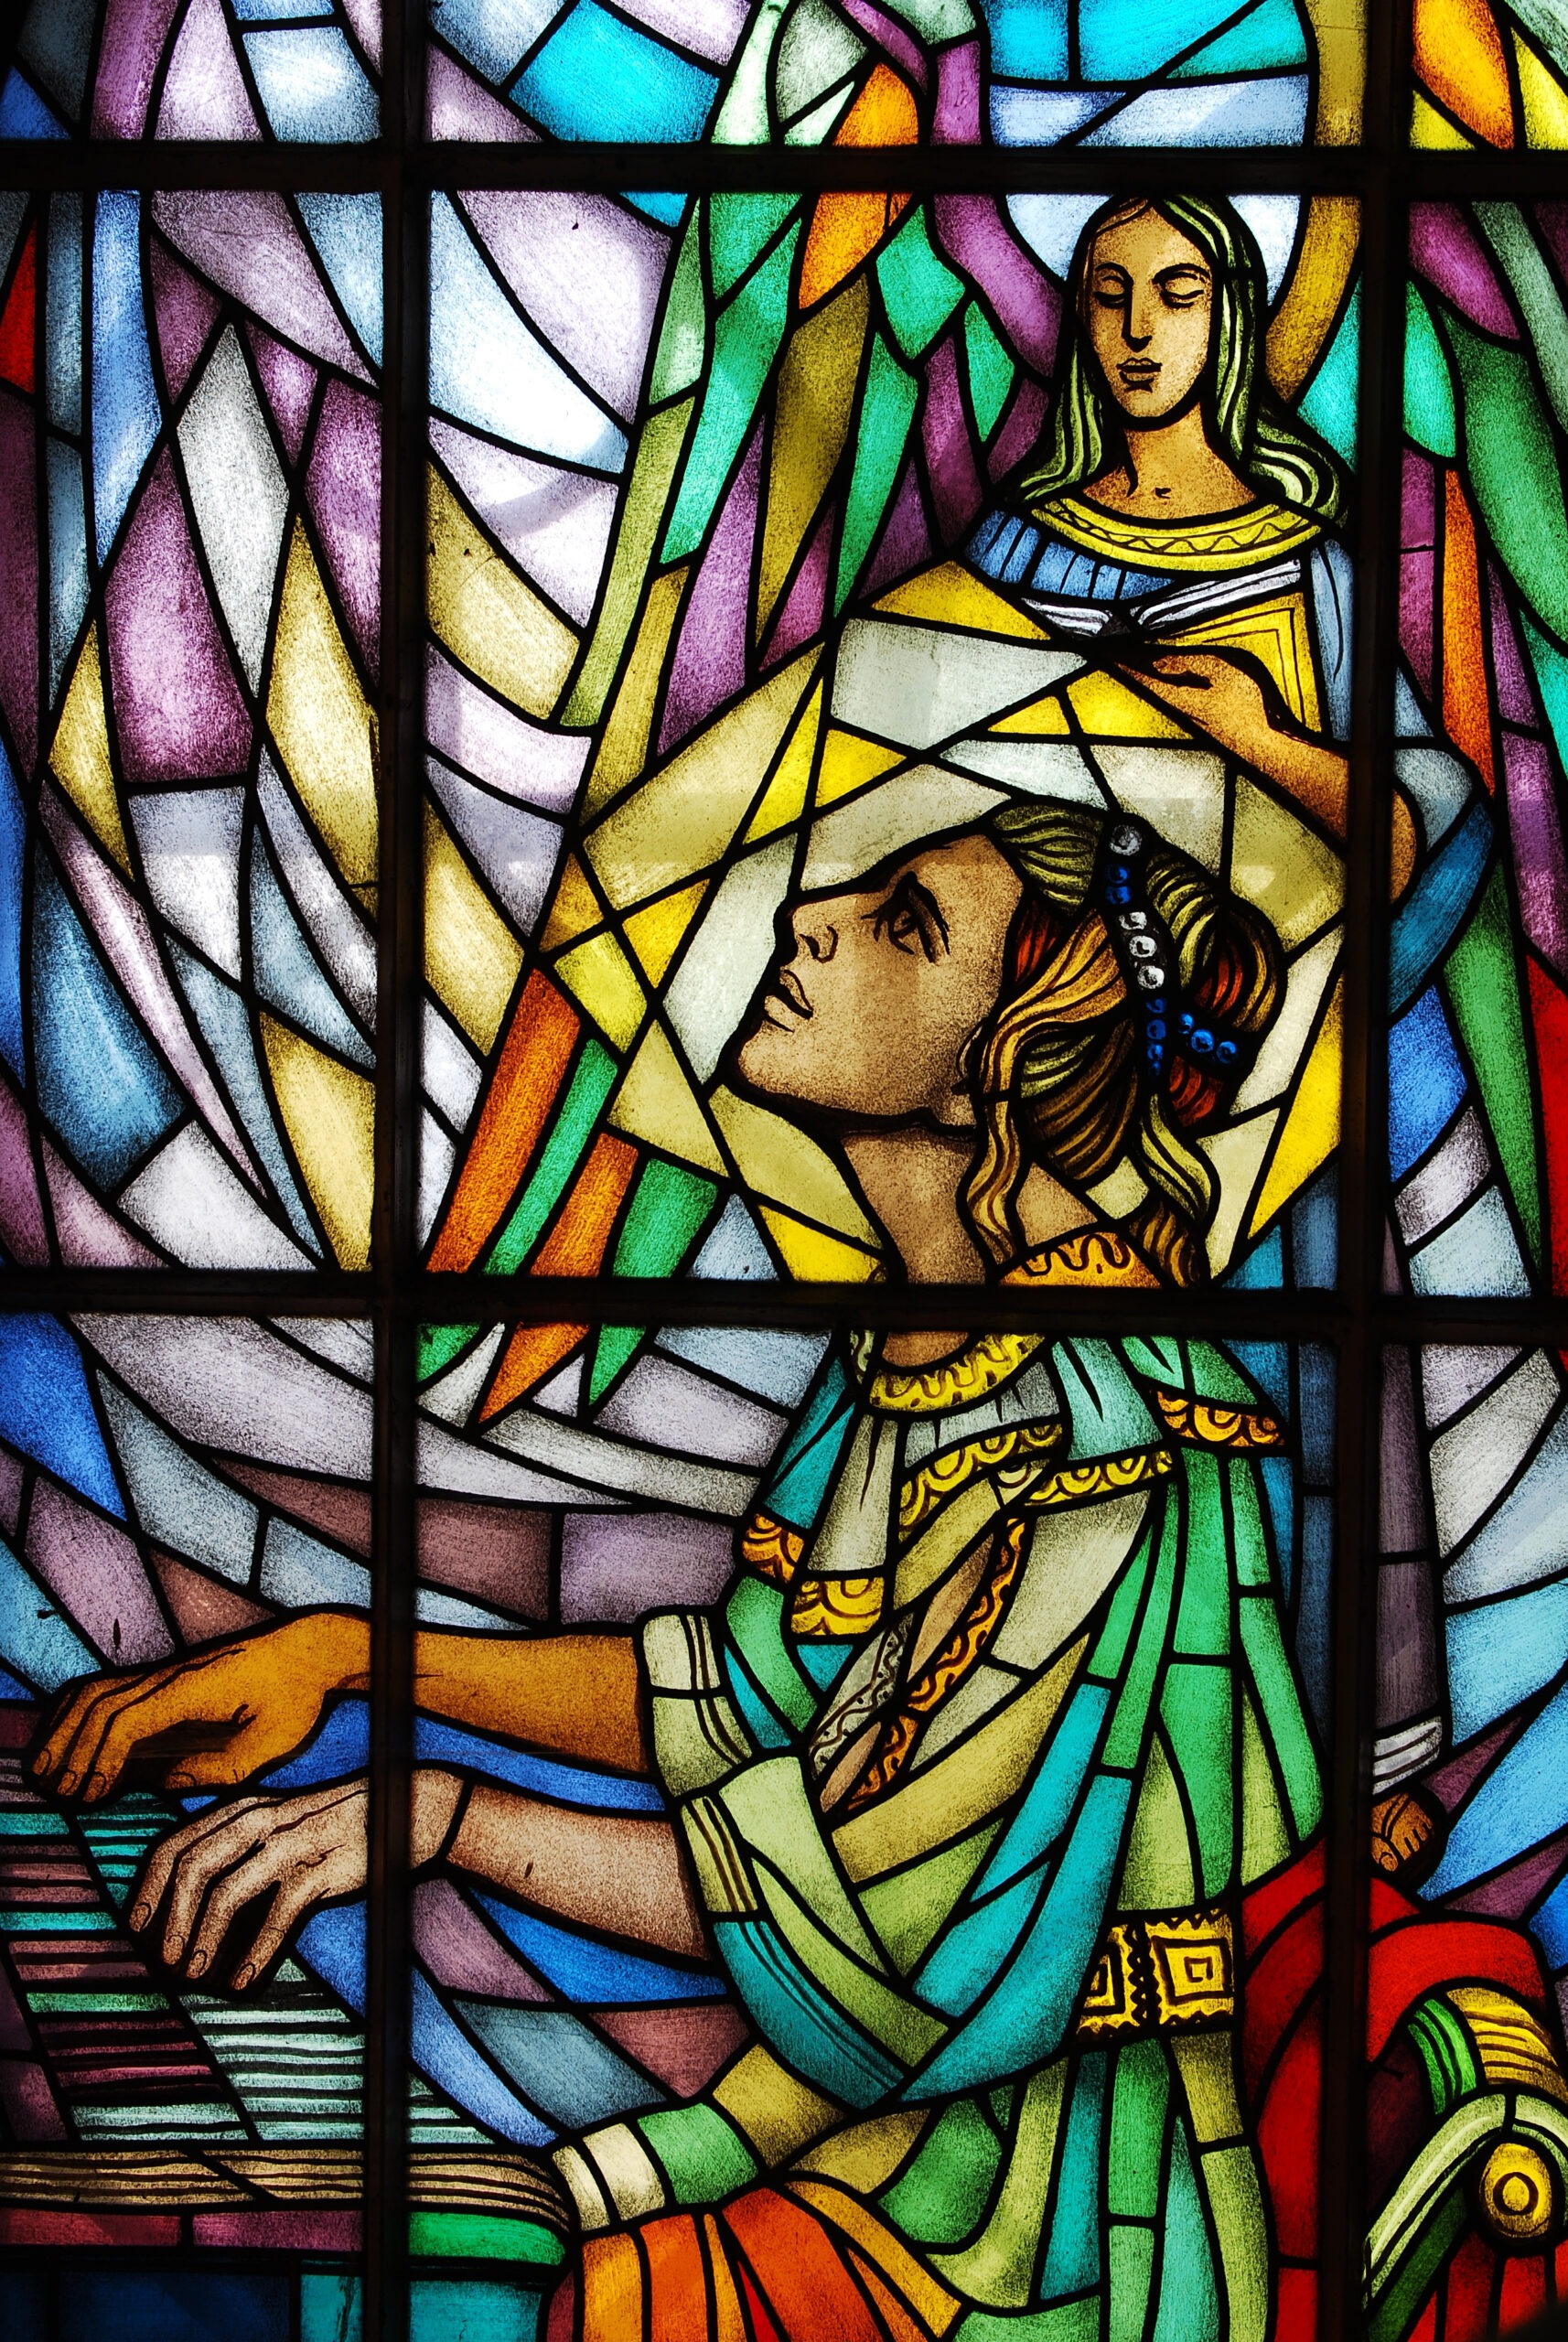 Stained glass featuring Saint Cecelia playing the organ